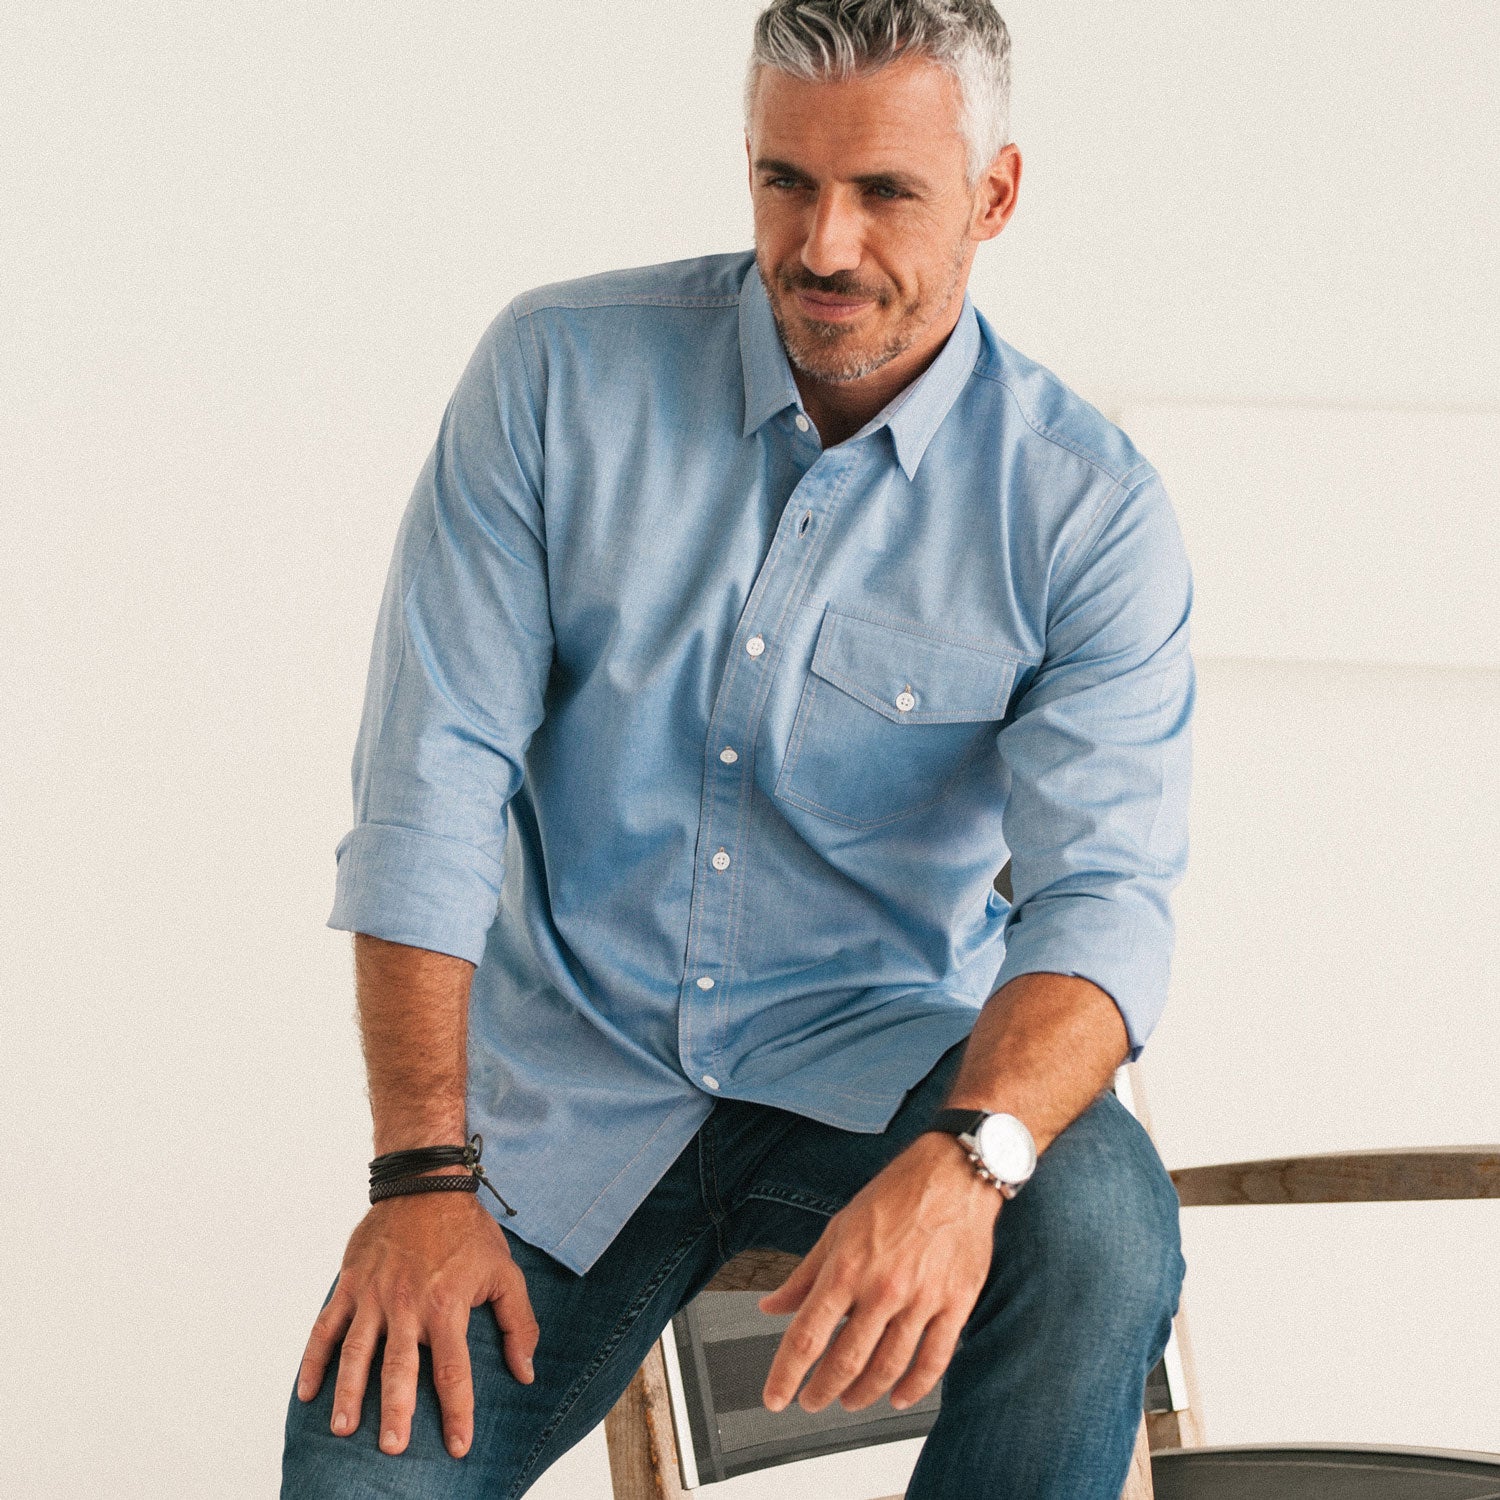 Men's Casual Shirt - Author in Classic Blue Oxford | Batch